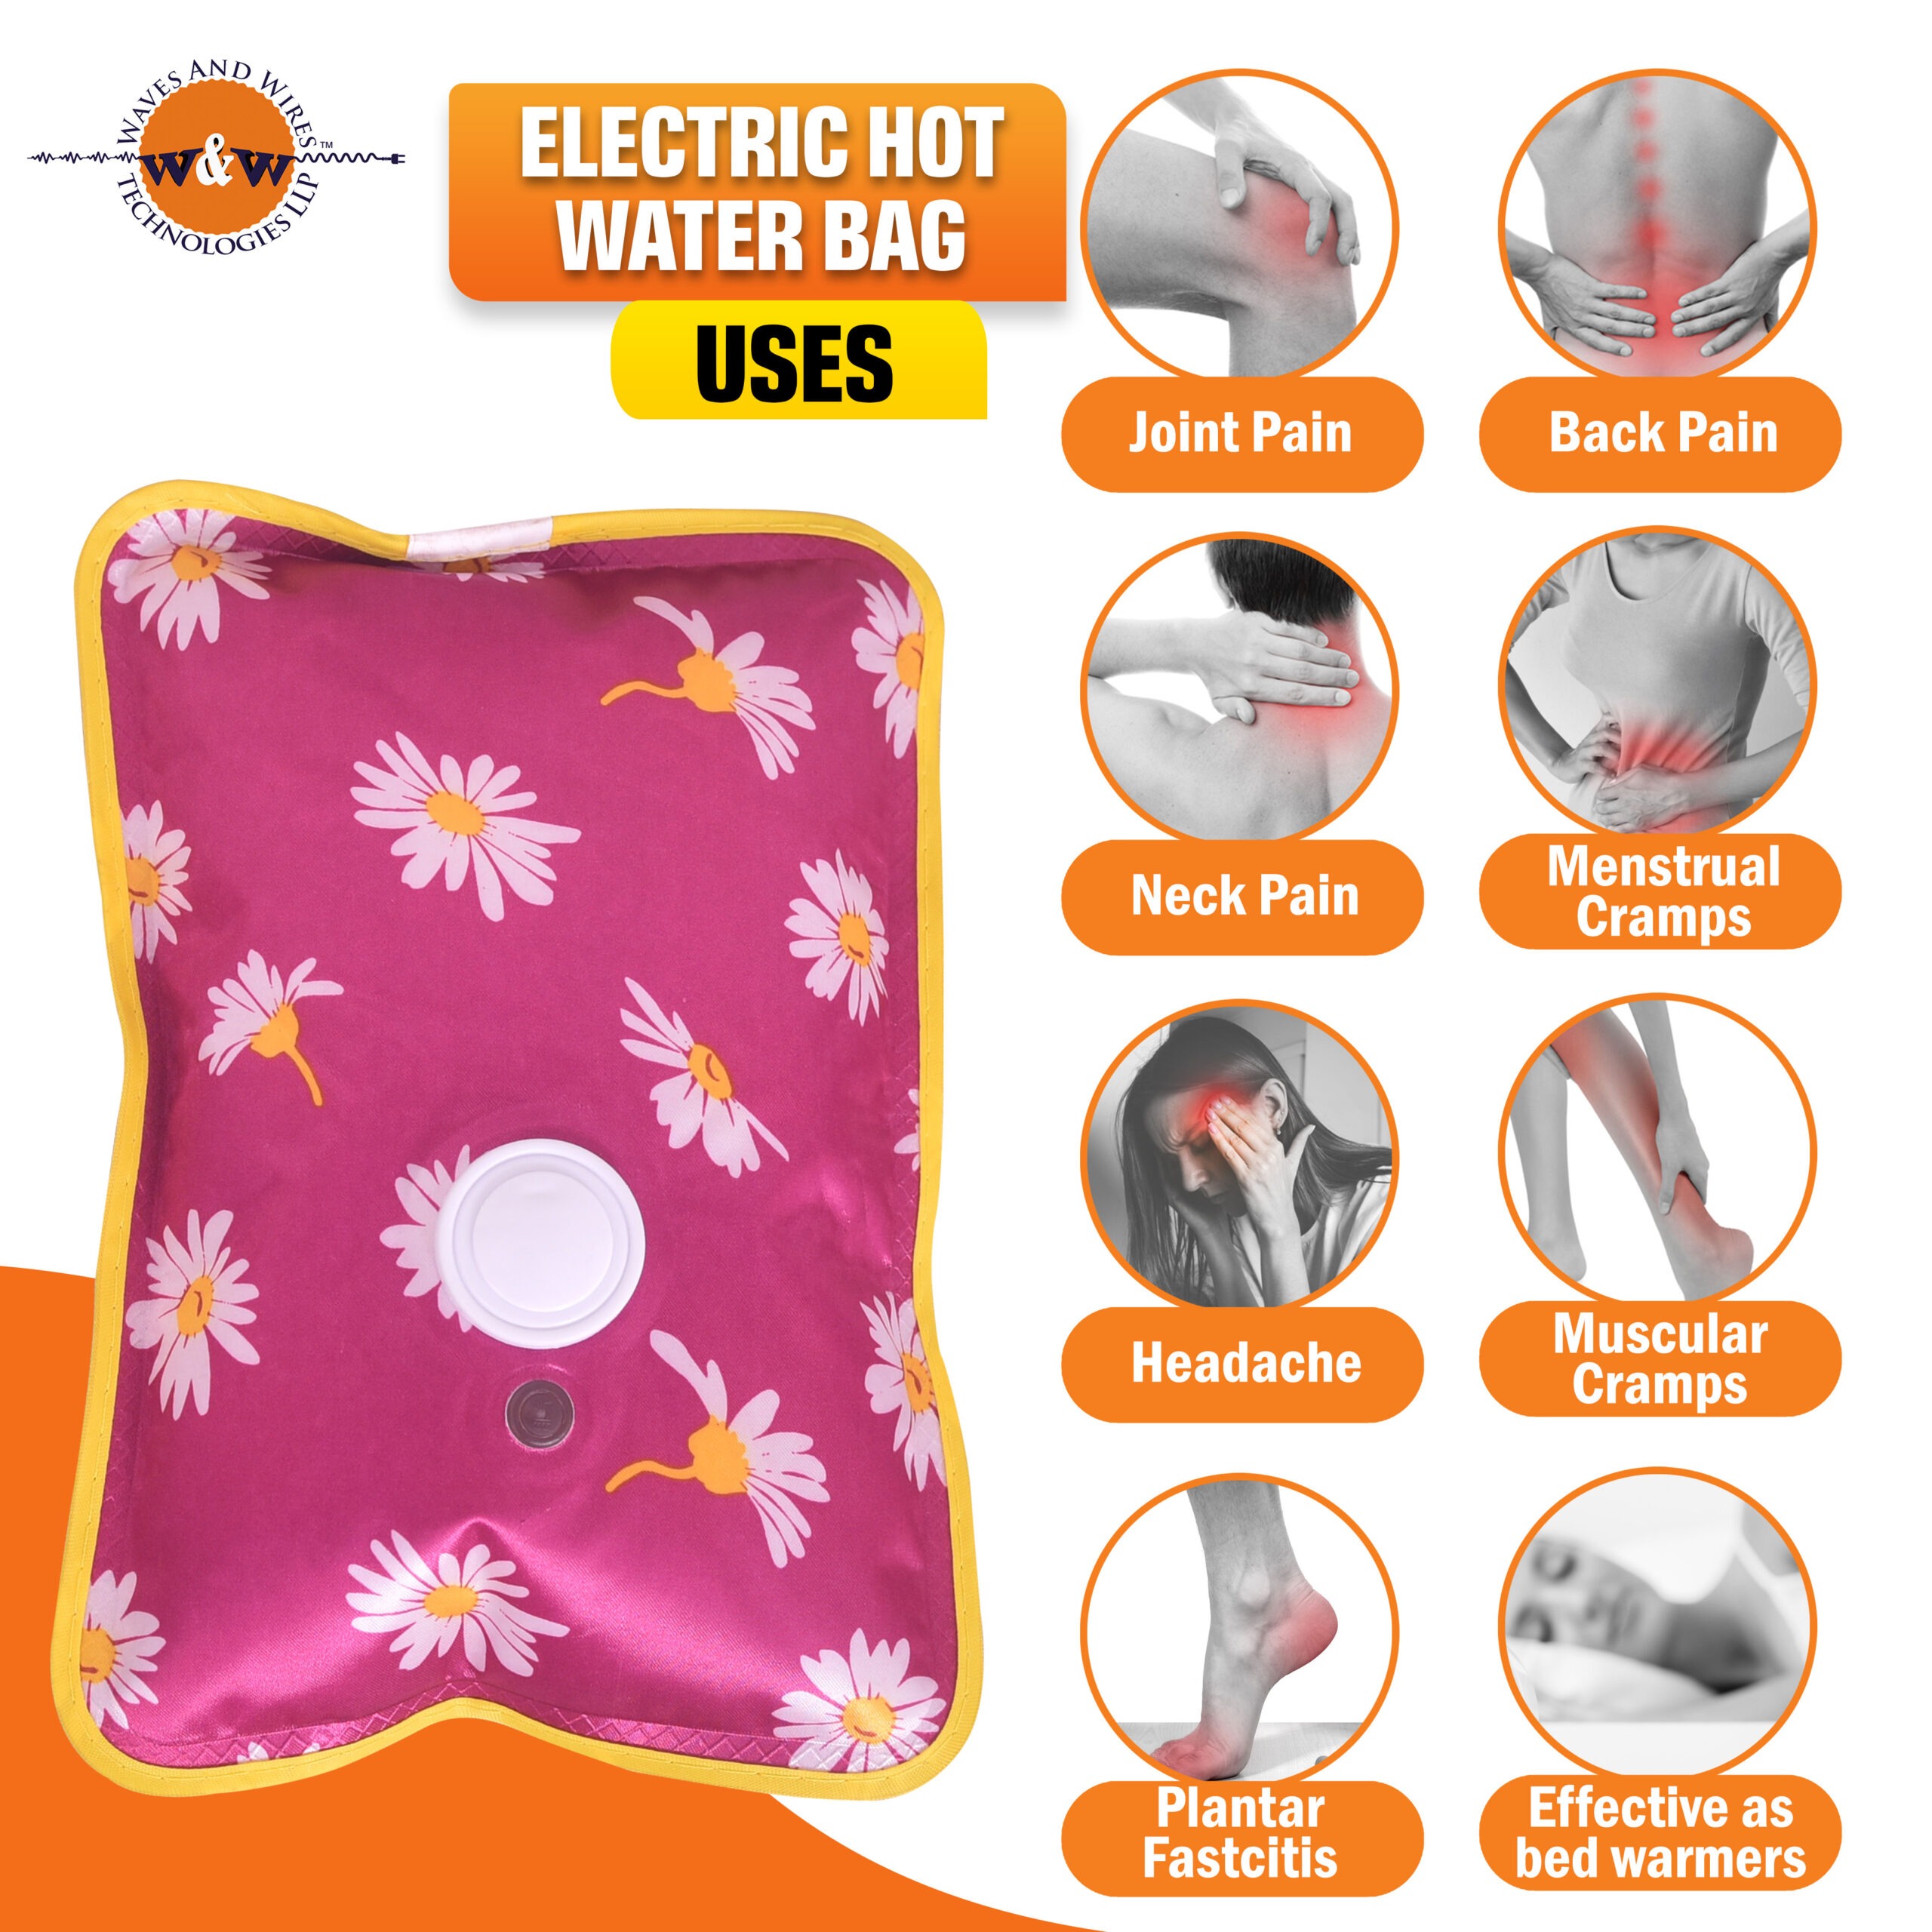 electric hot water bag uses